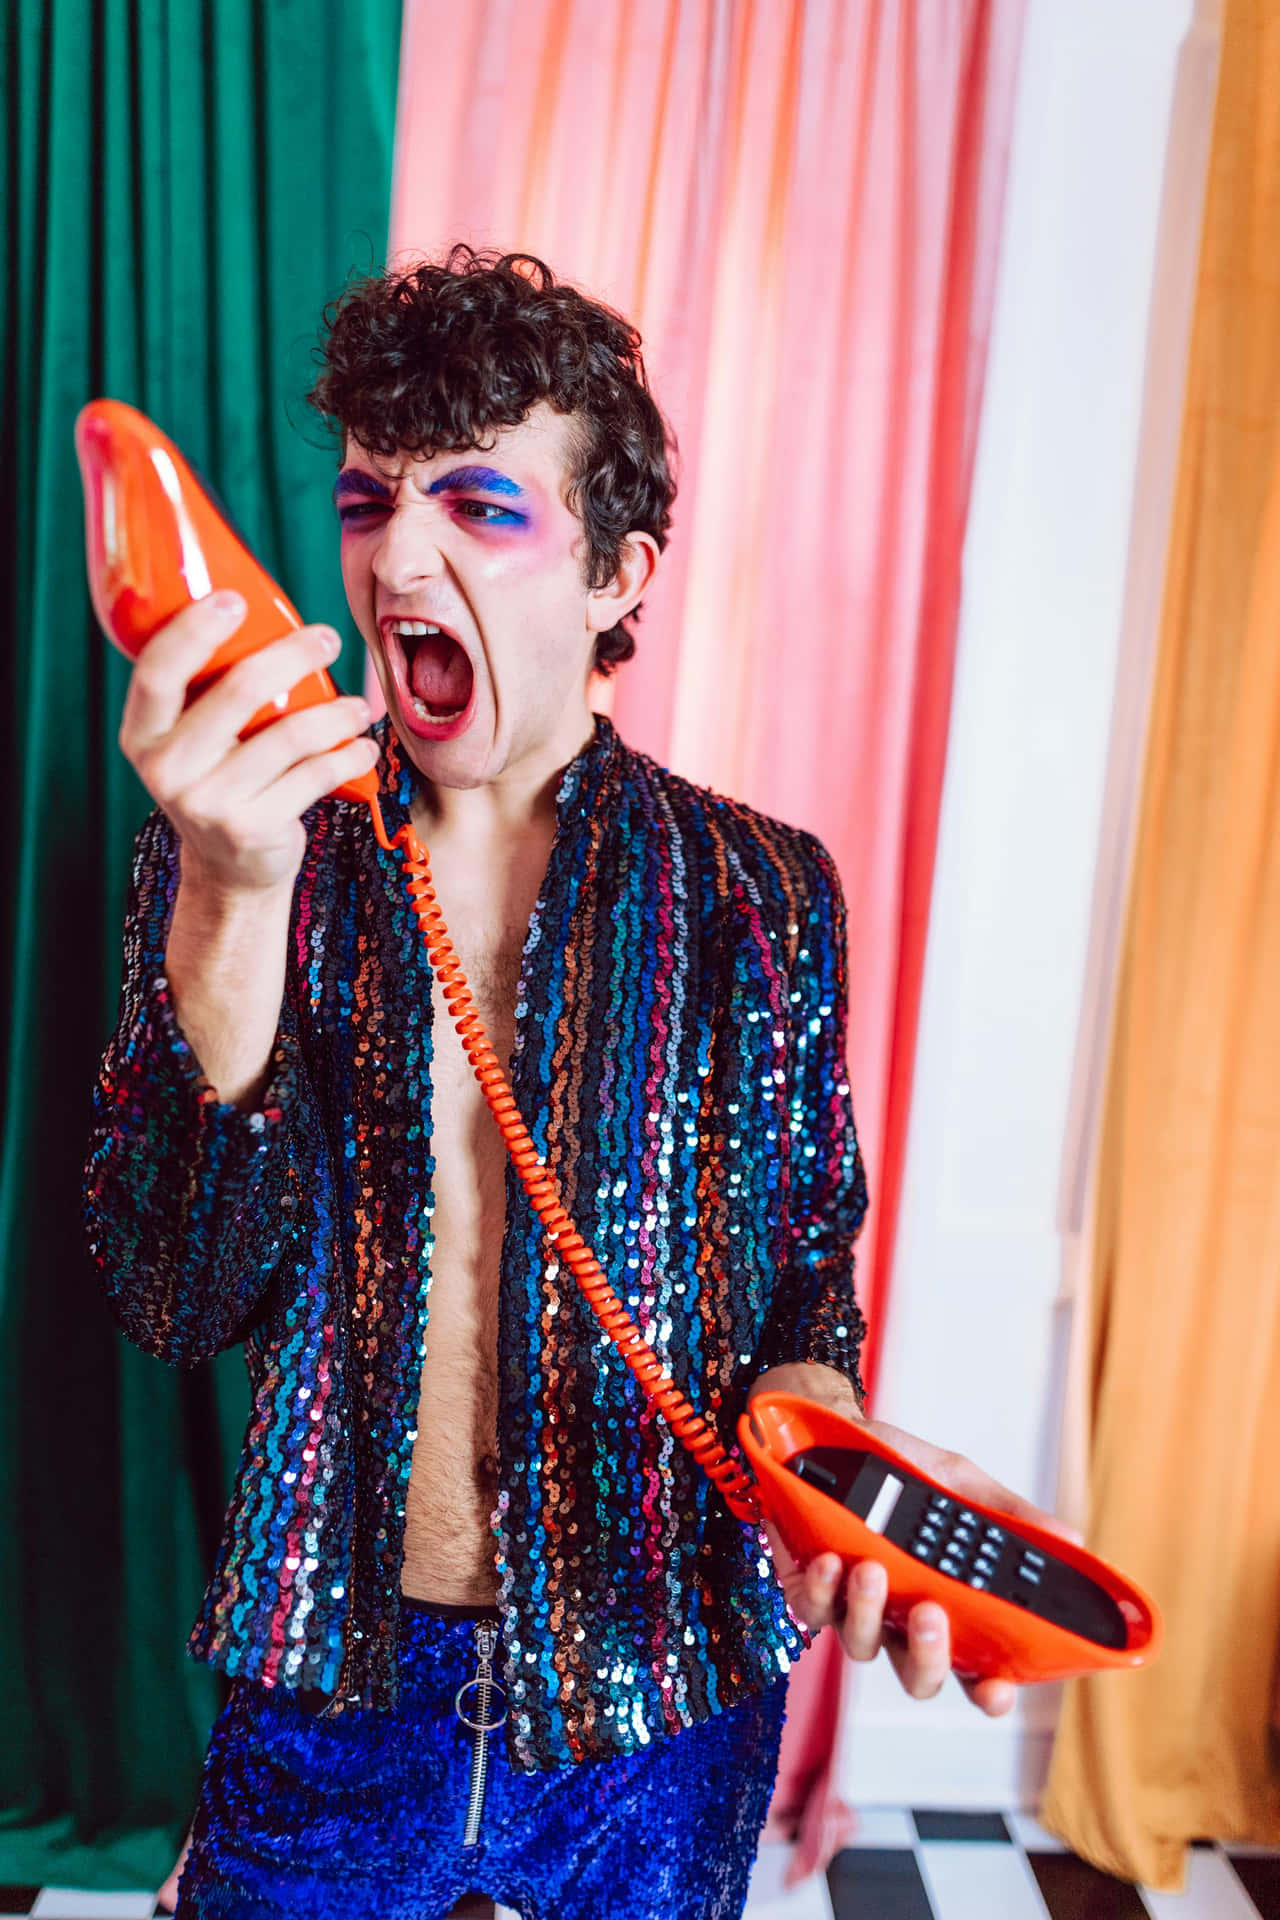 Colorful Outfit Man Yelling Into Phone Wallpaper